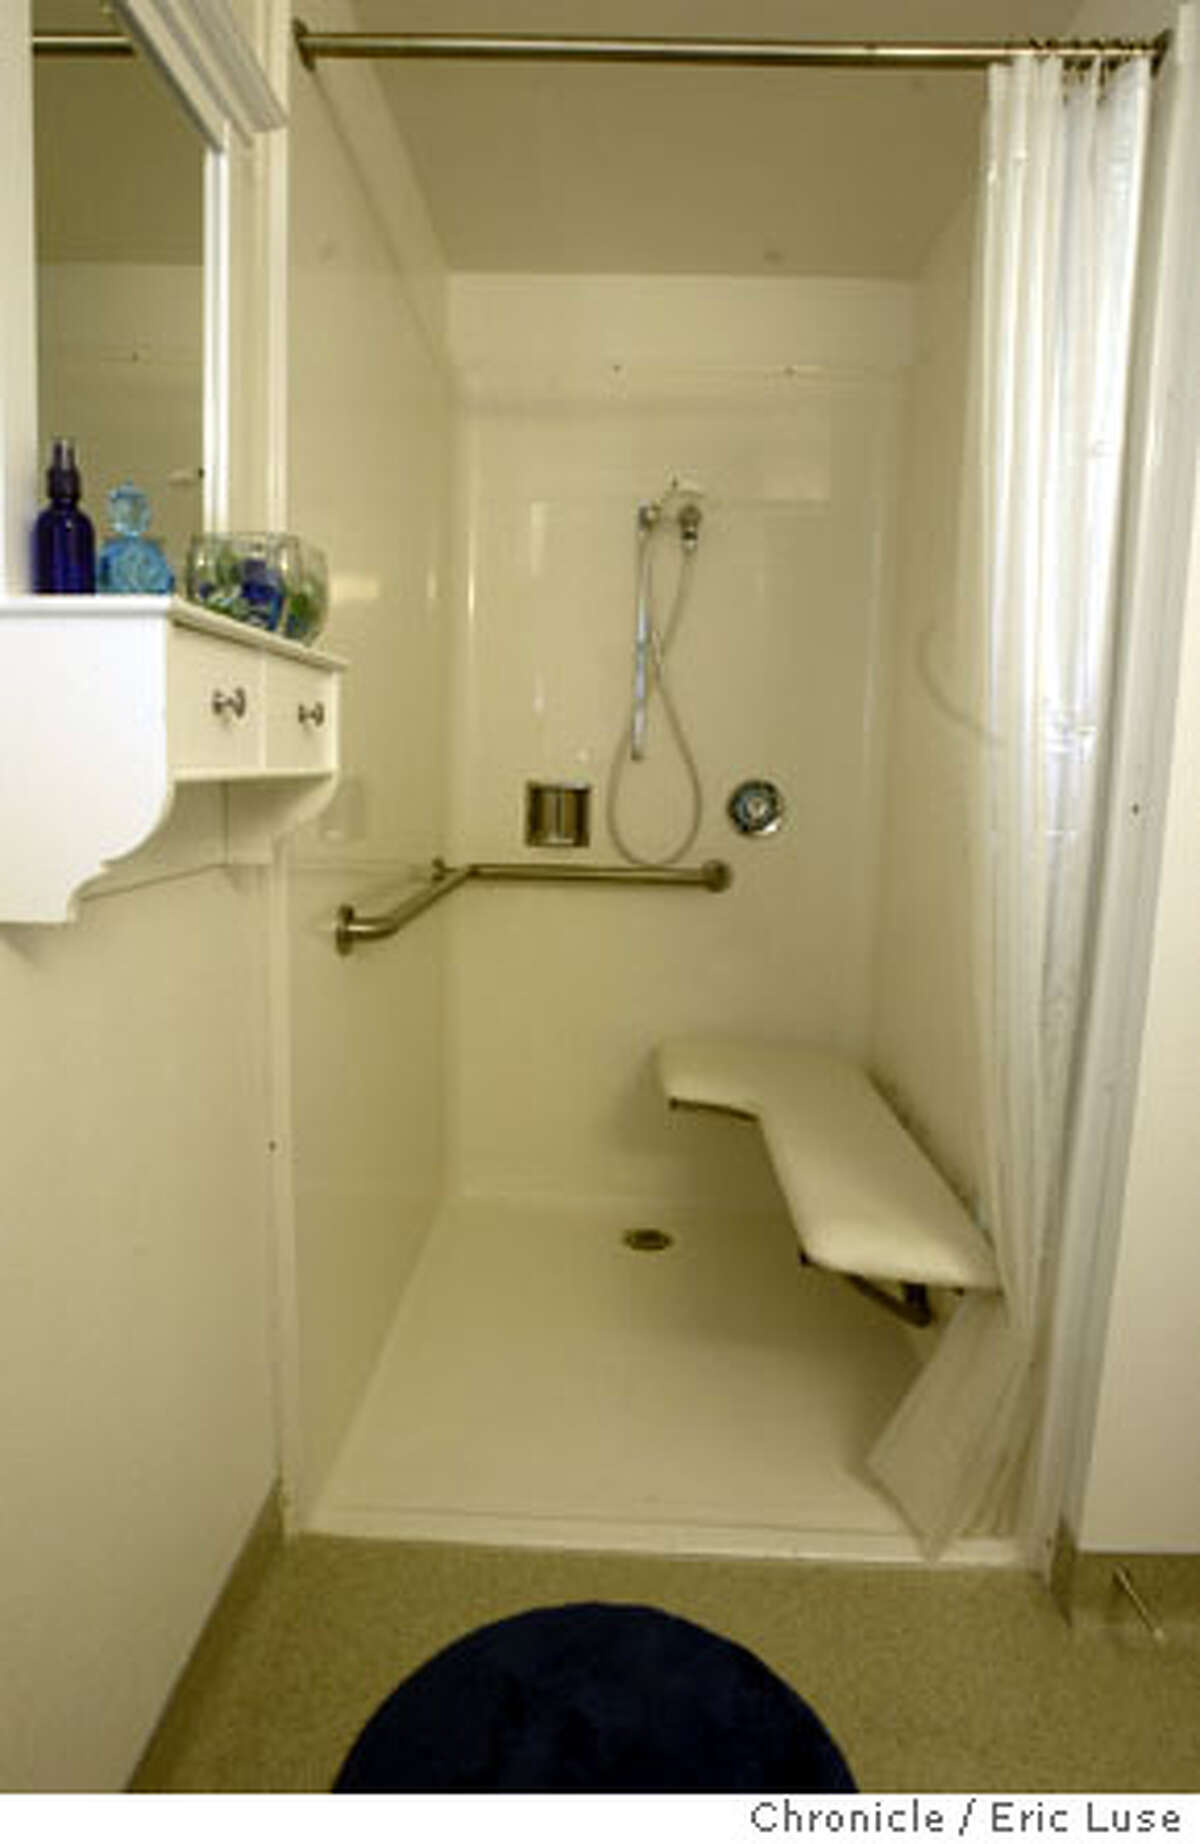 universal_059_el.JPG Universal bathroom includes a shower that is at the same floor level for wheelchair use Grand opening of the first all-universal-design affordable housing complex in the nation. (Universal design follows a set of principles intended to make a space accessible and safe for seniors and handicapped -- grab bars, shorter counters, wide doorways, etc.) We get a tour at 11 am with Susan Friedland (executive director) and/or Kevin Zwick (director of housing development).Thoughts on photos include some of residents living there, also a wider shot or two that show the complex and how it looks, how it's laid out etc. Story is a news/feature, but some photos could run in the future with a story that a freelancer is working up on affordable housing Event on 7/13/05 in Berkeley Eric Luse / The Chronicle